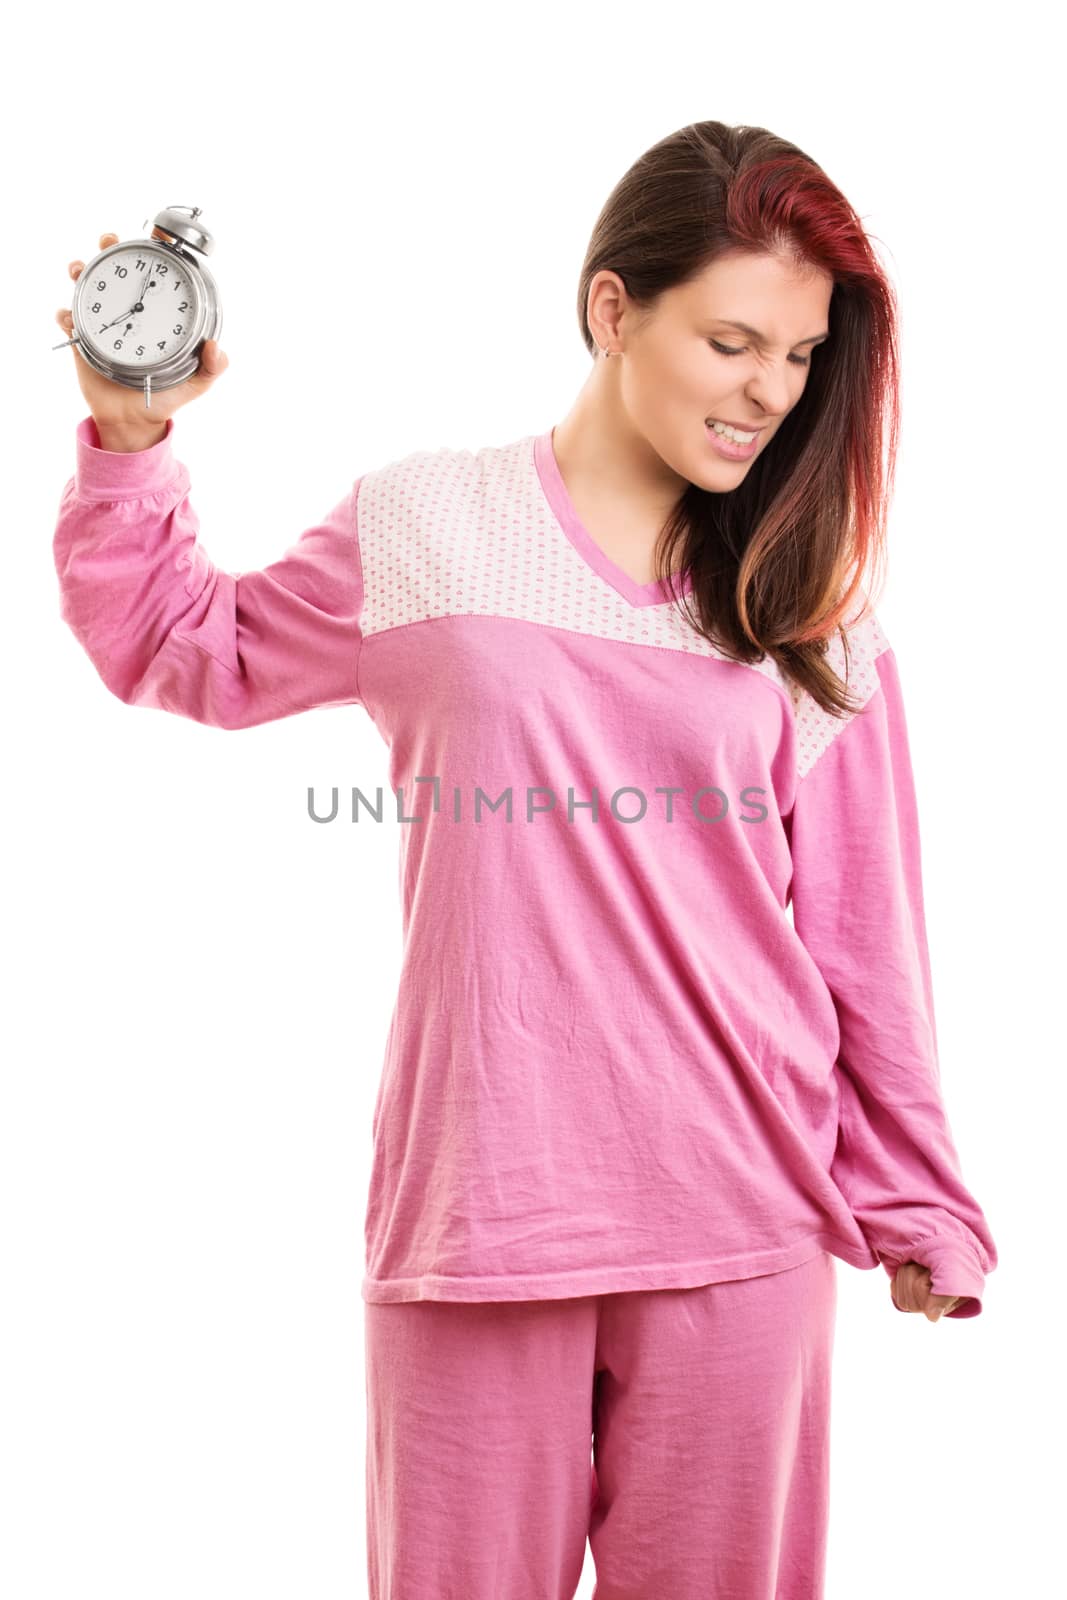 Angry girl in pajamas throwing an alarm clock by Mendelex